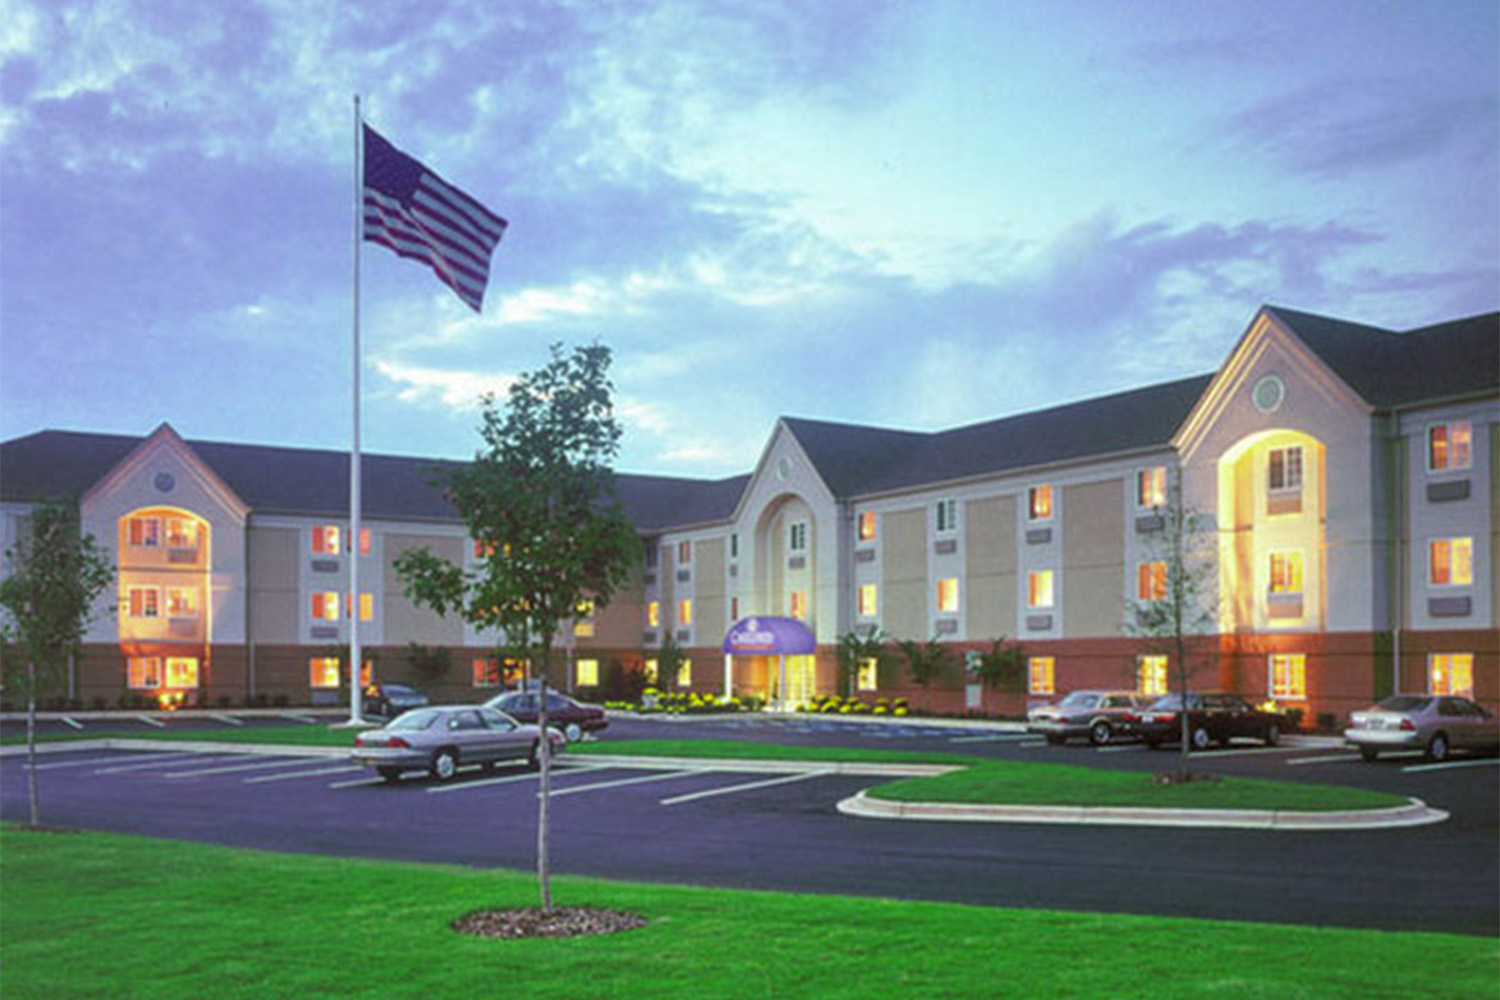 exterior of Candlewood Suites in Burlington, at nighttime